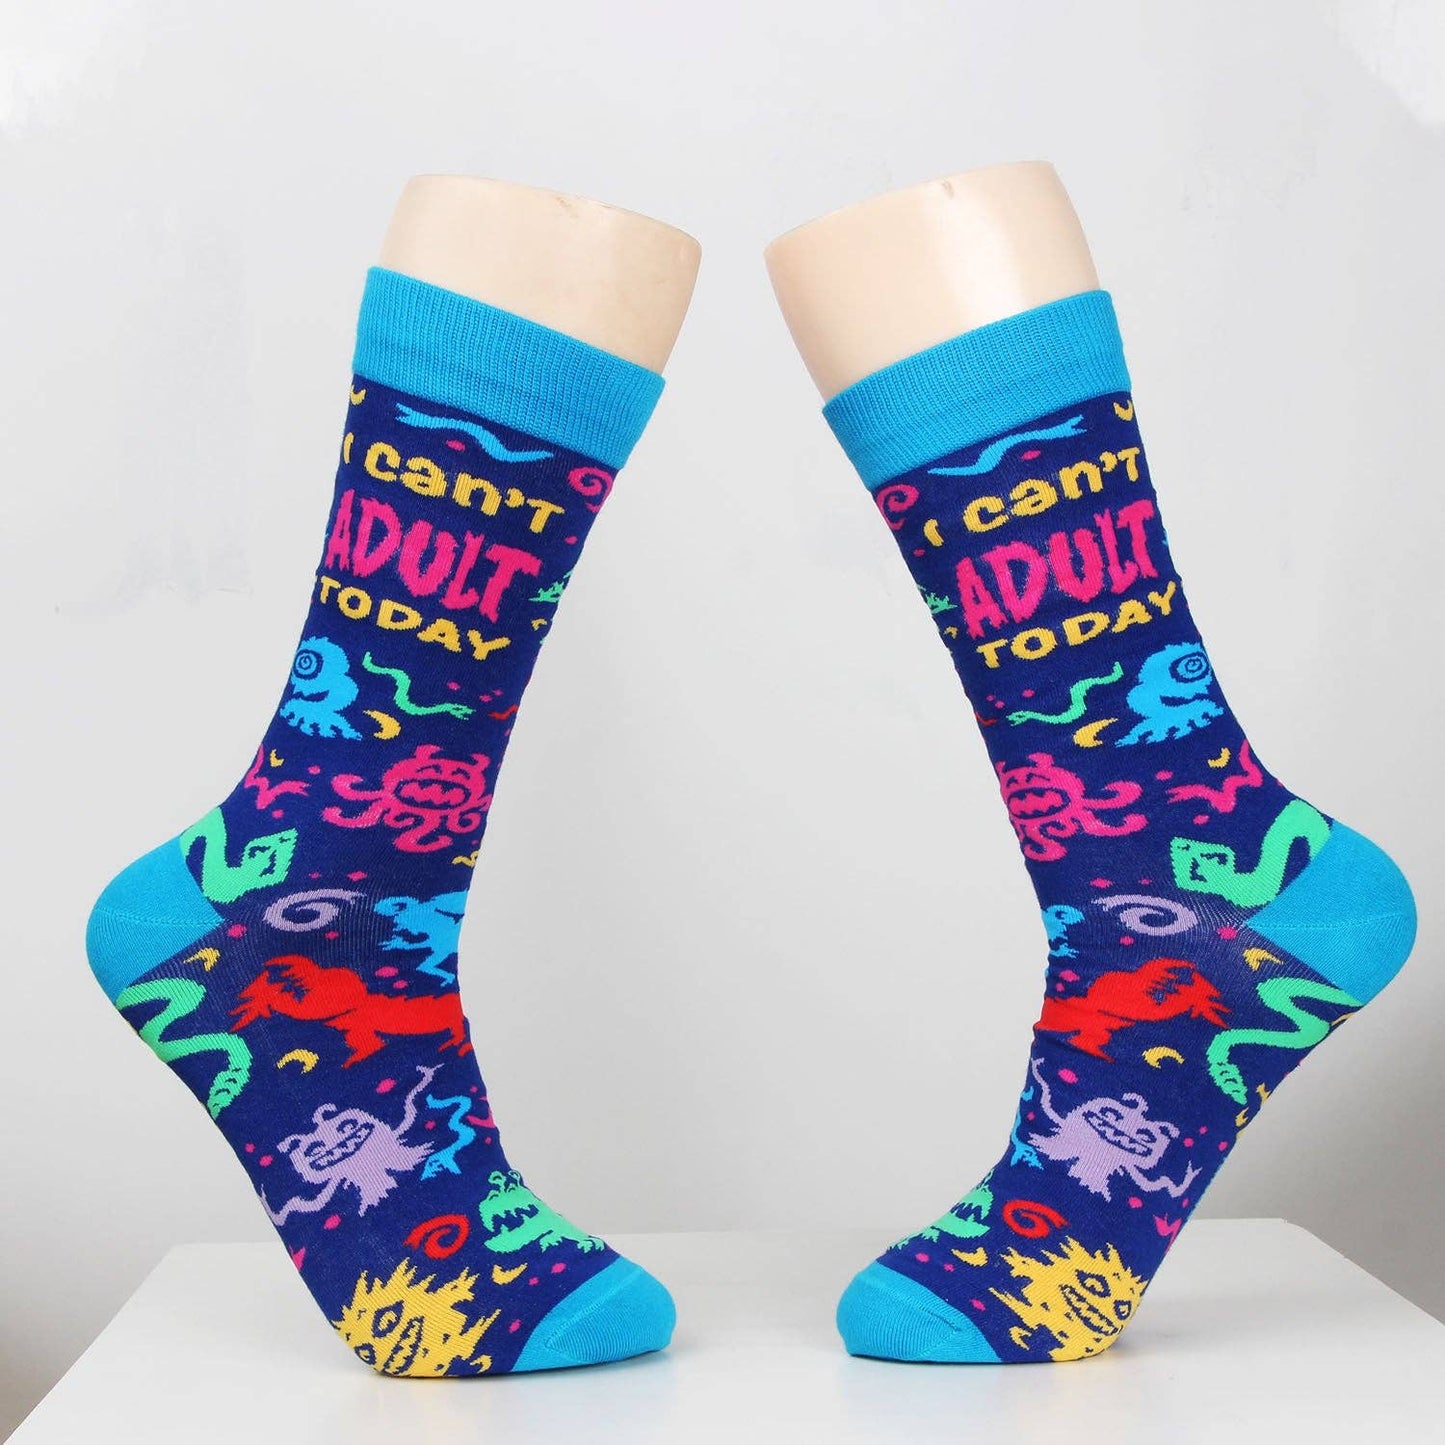 I Can’t Adult Today Men's Novelty Crew Socks